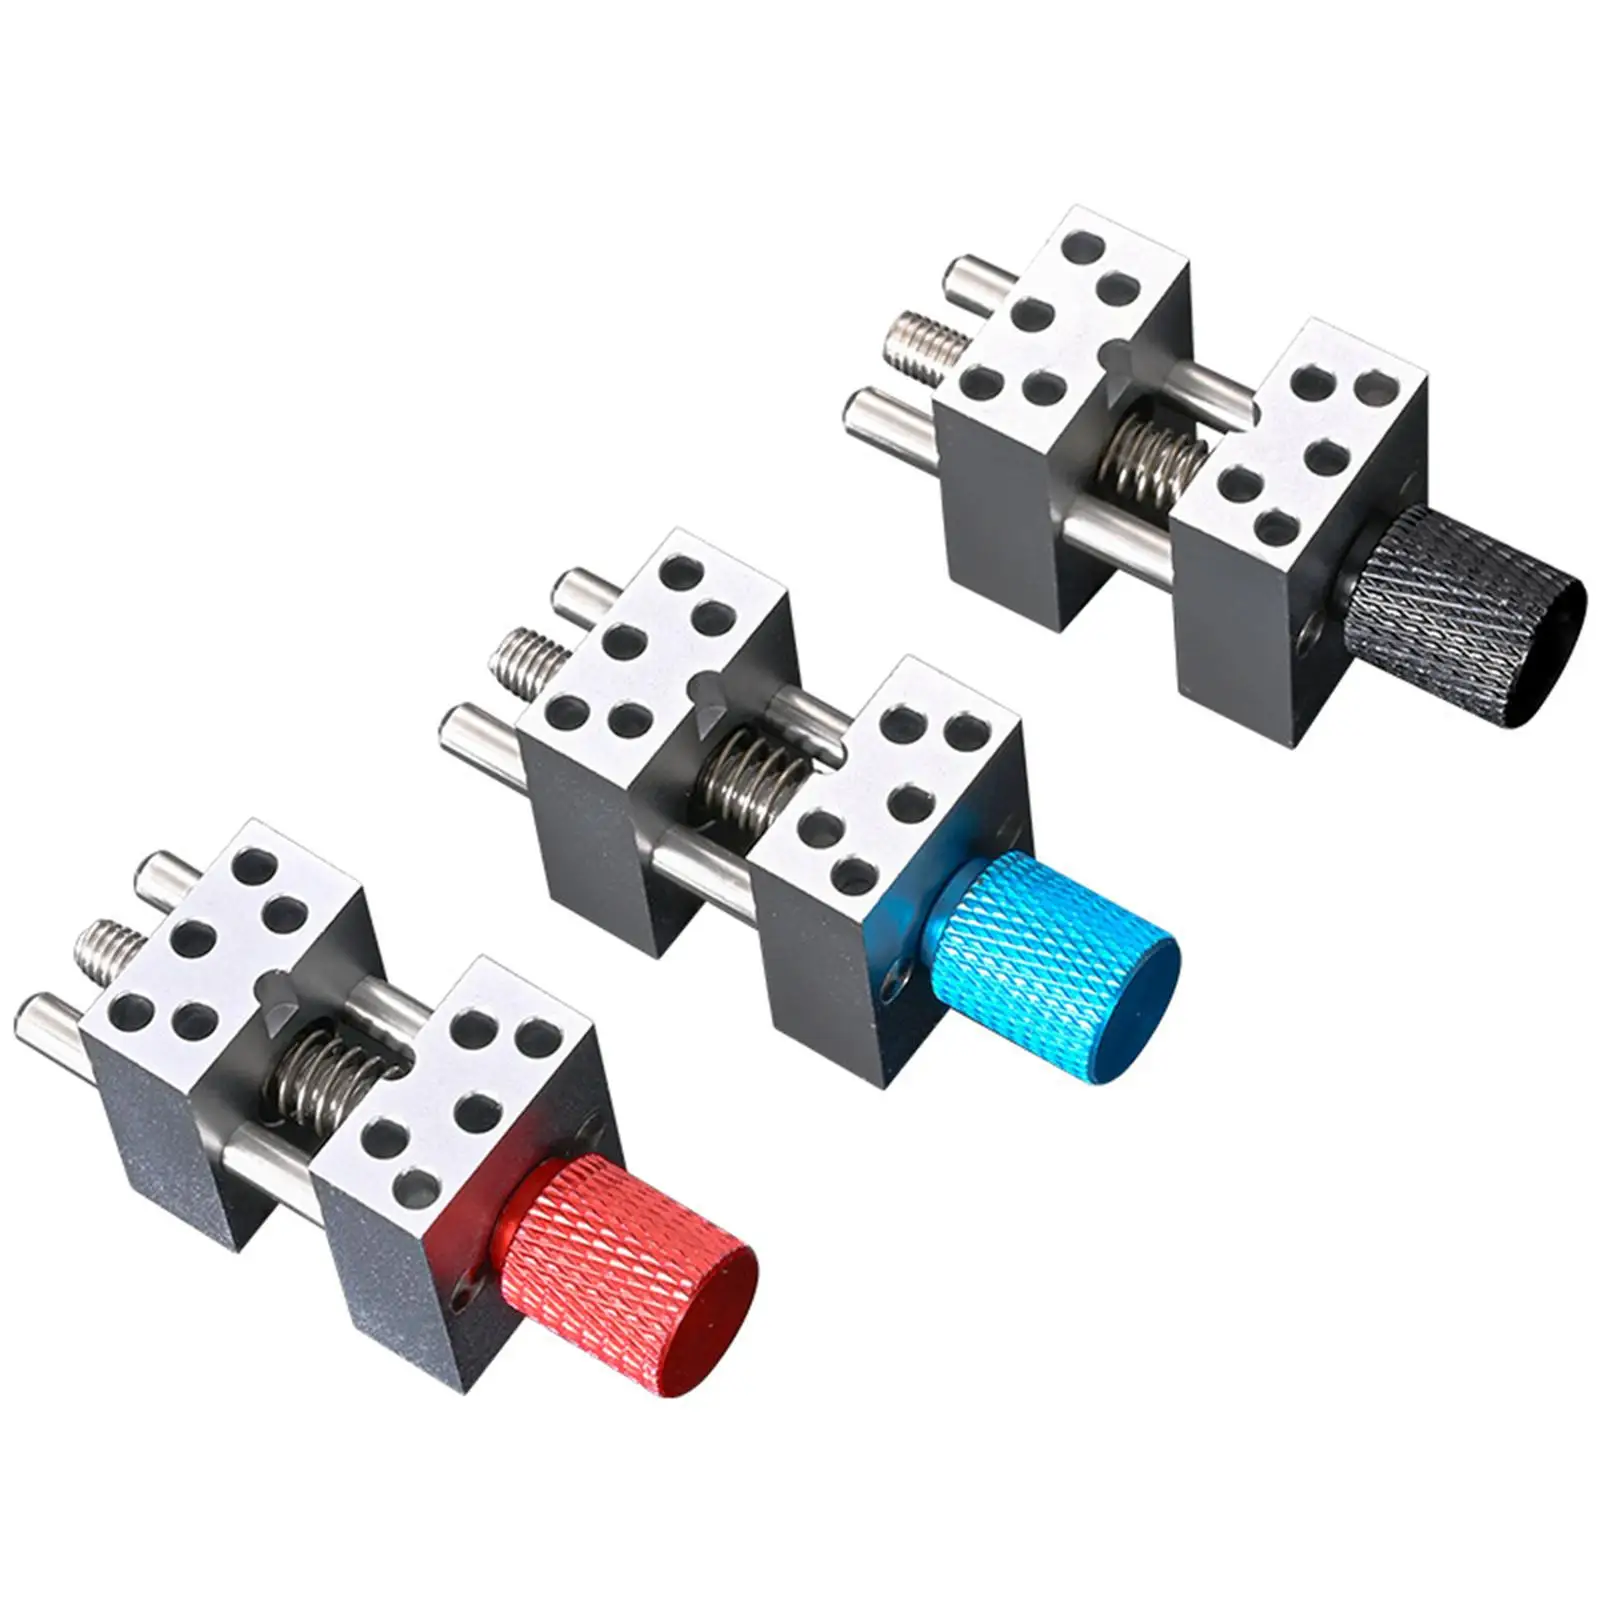 Universal Mini Drill Press Vise Clamp Model Crafts Tools for Assembly Model Building Tools Model Parts Engraving Electronics